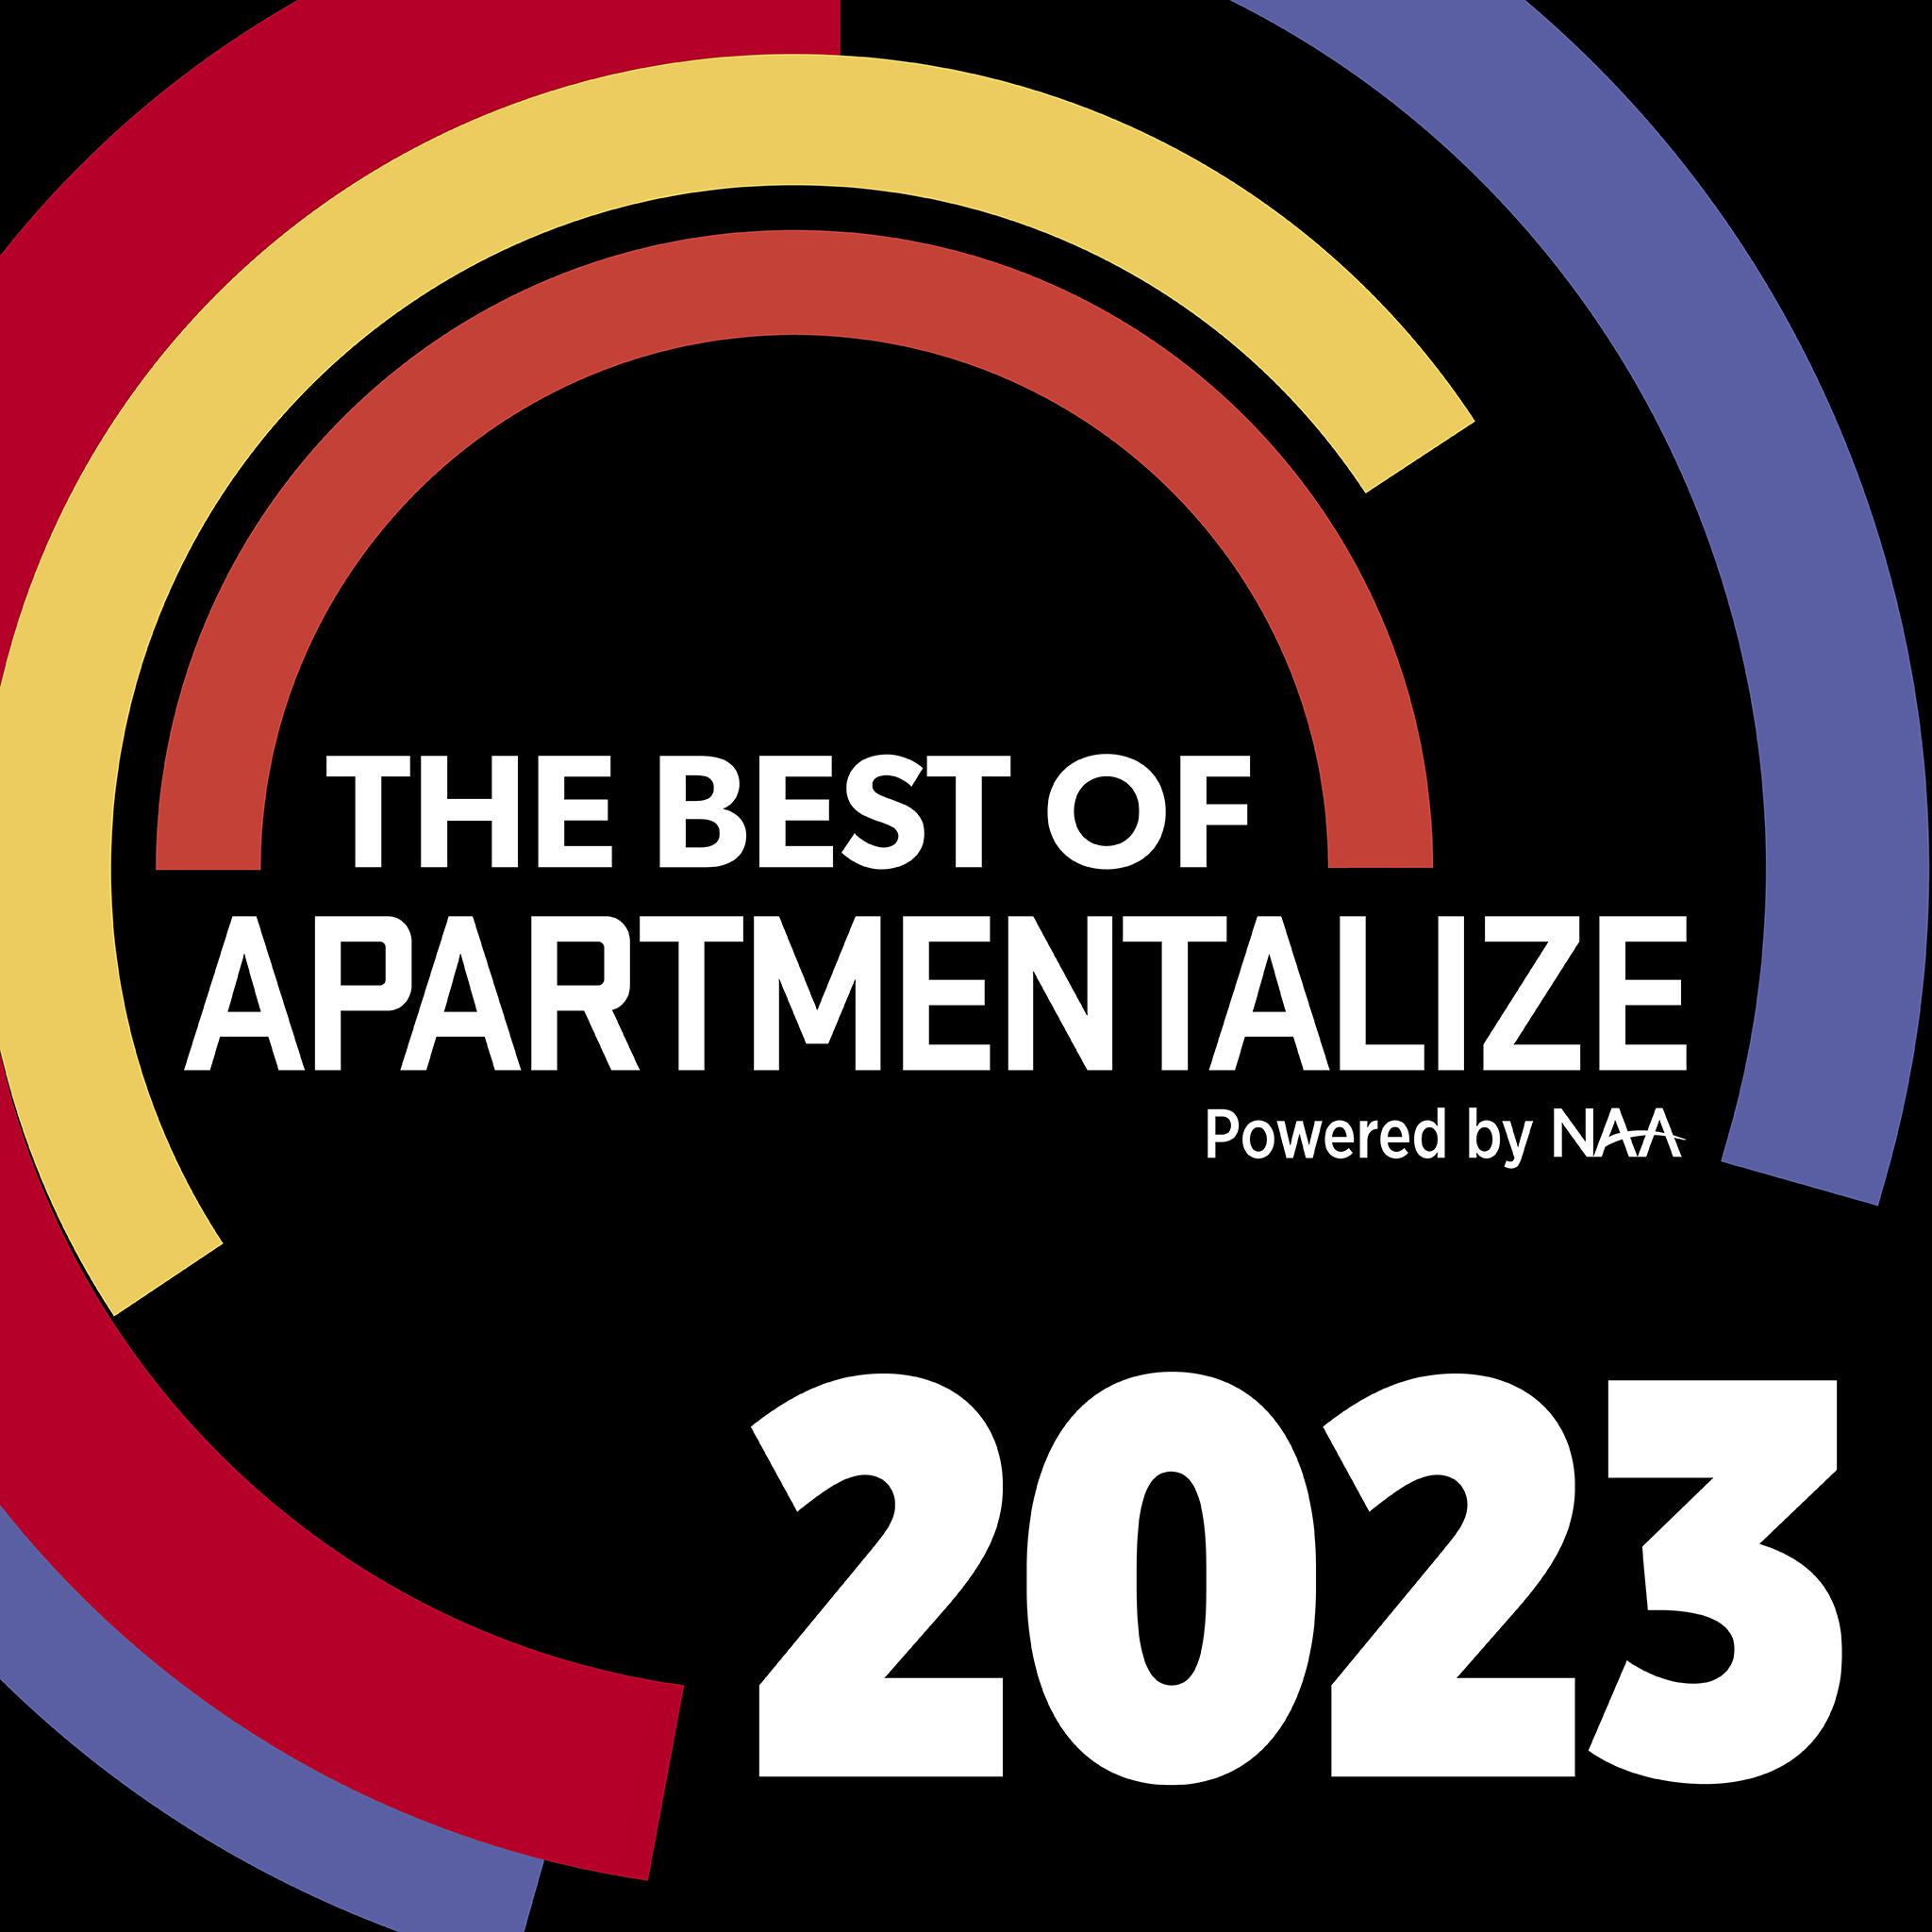 best of apartmentalize 2023 graphic